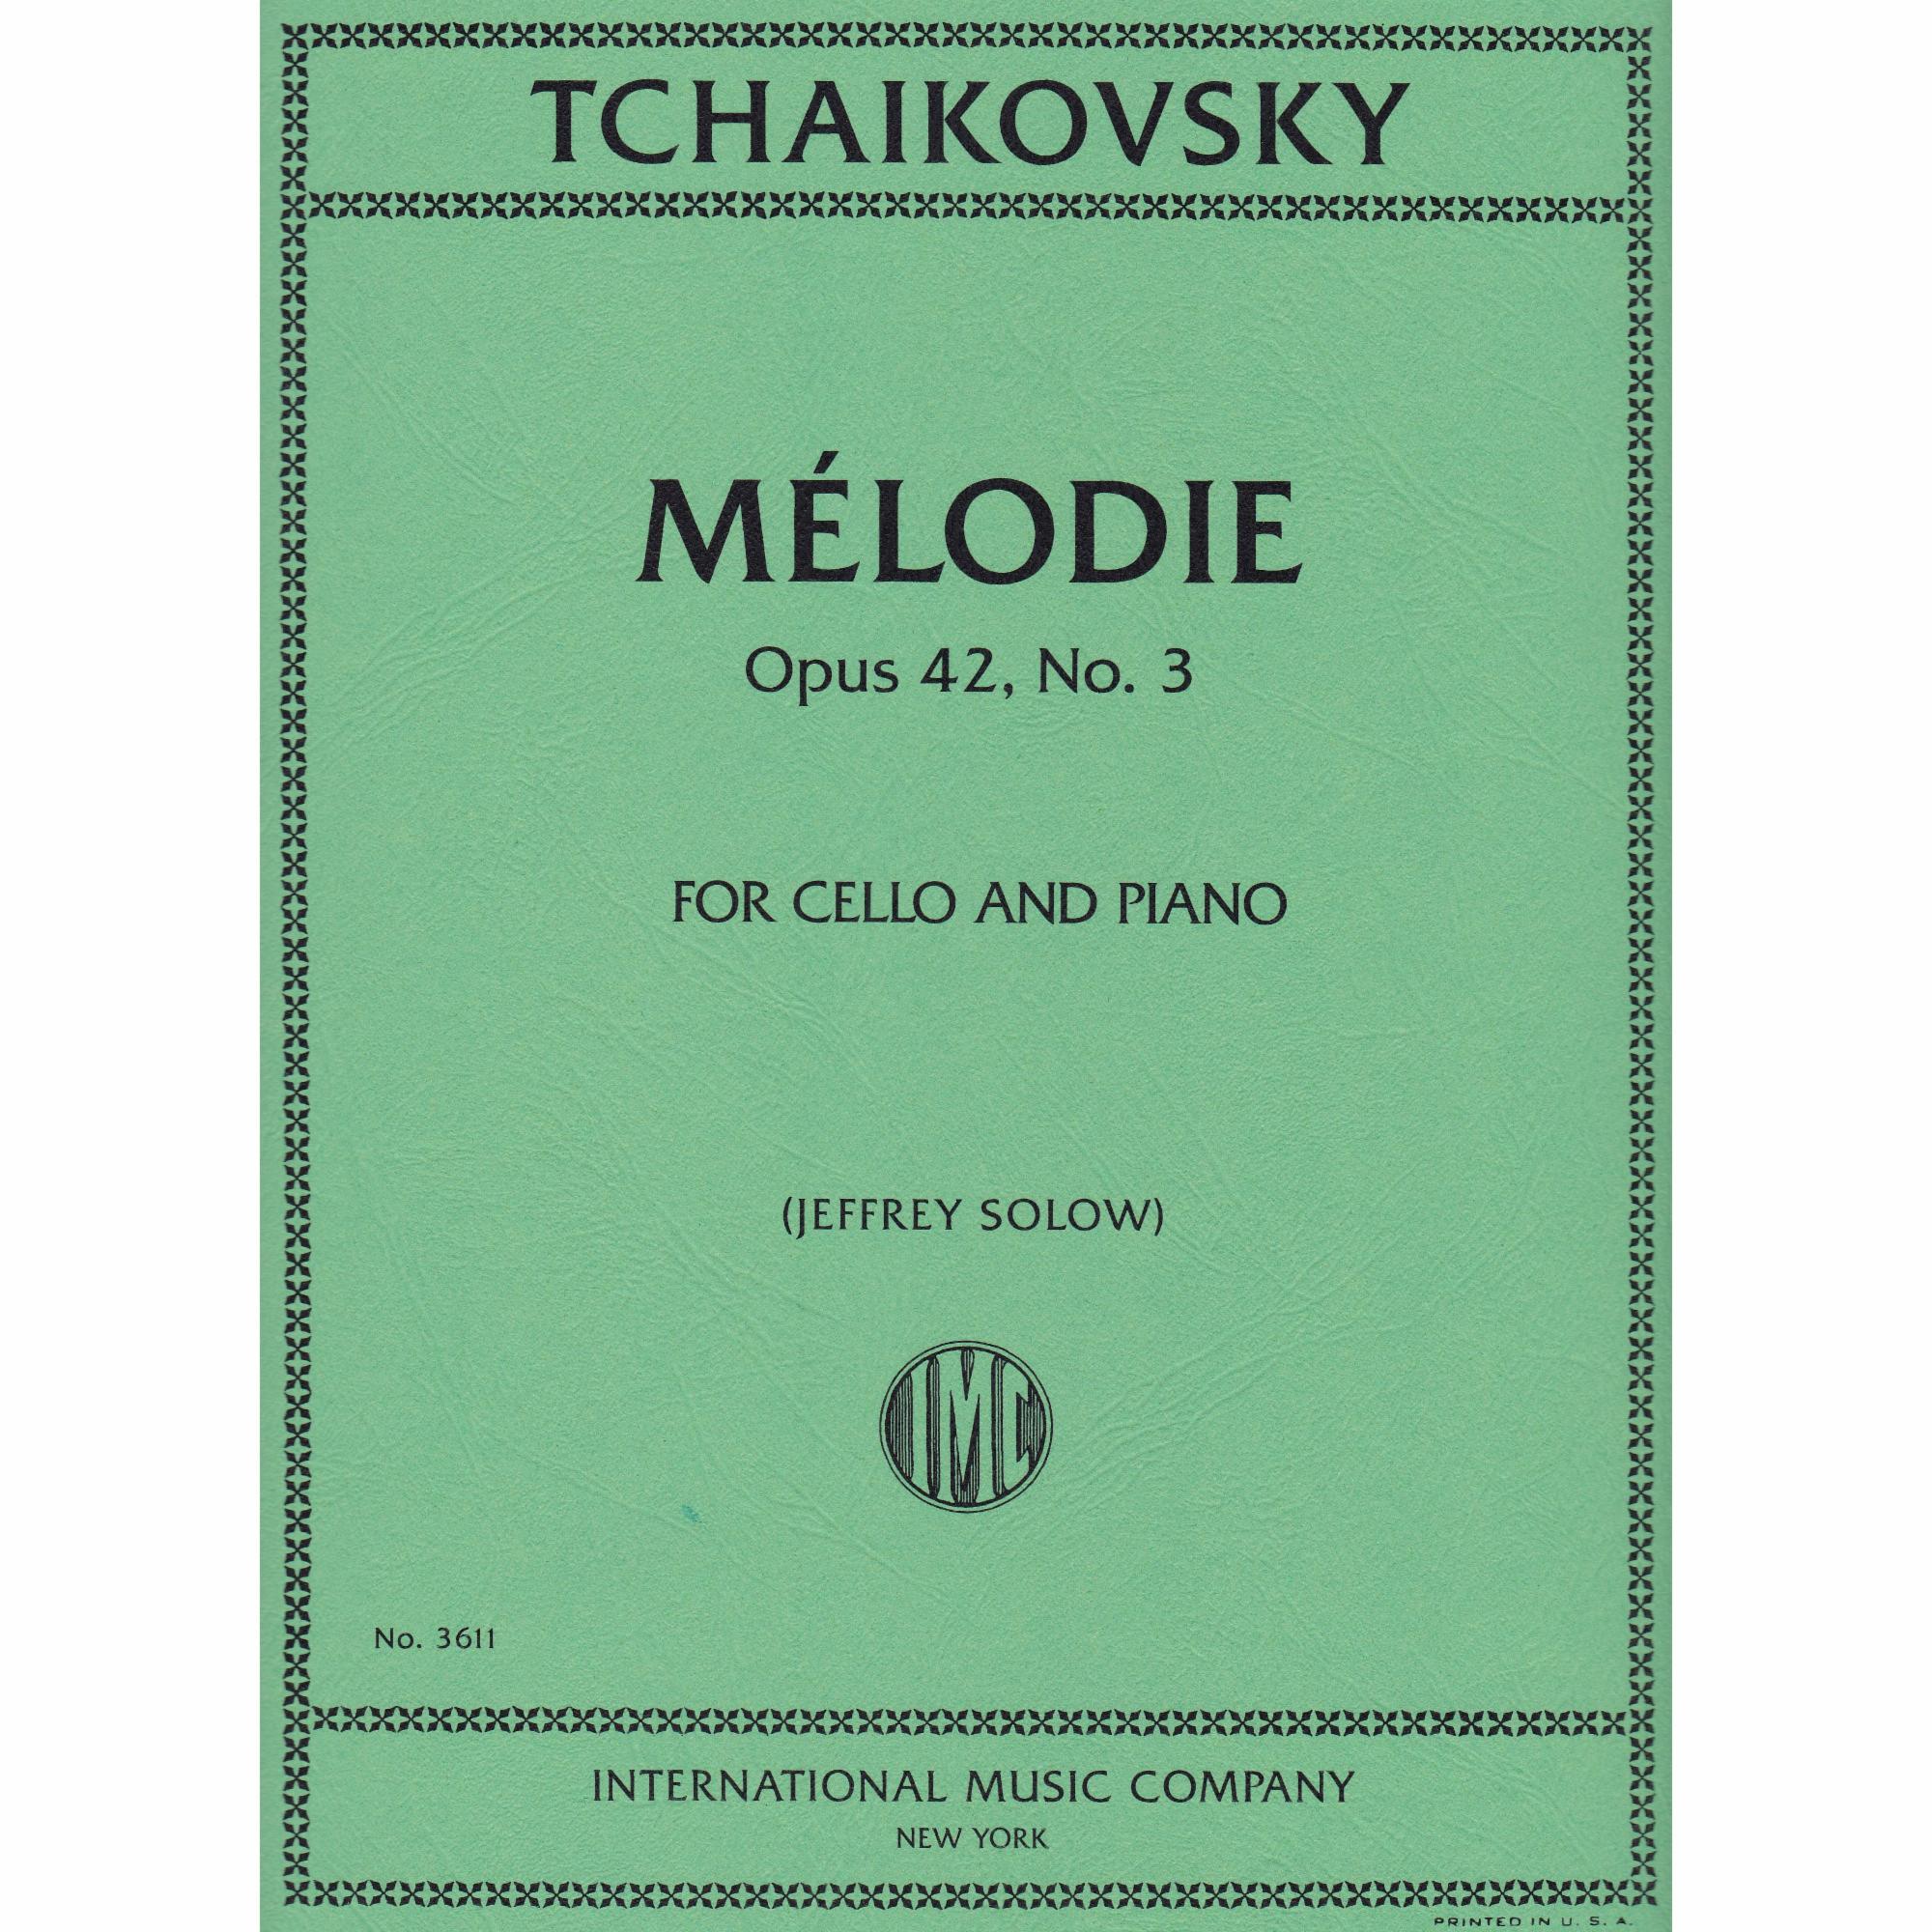 Melodie for Cello and Piano, Op. 42, No. 3